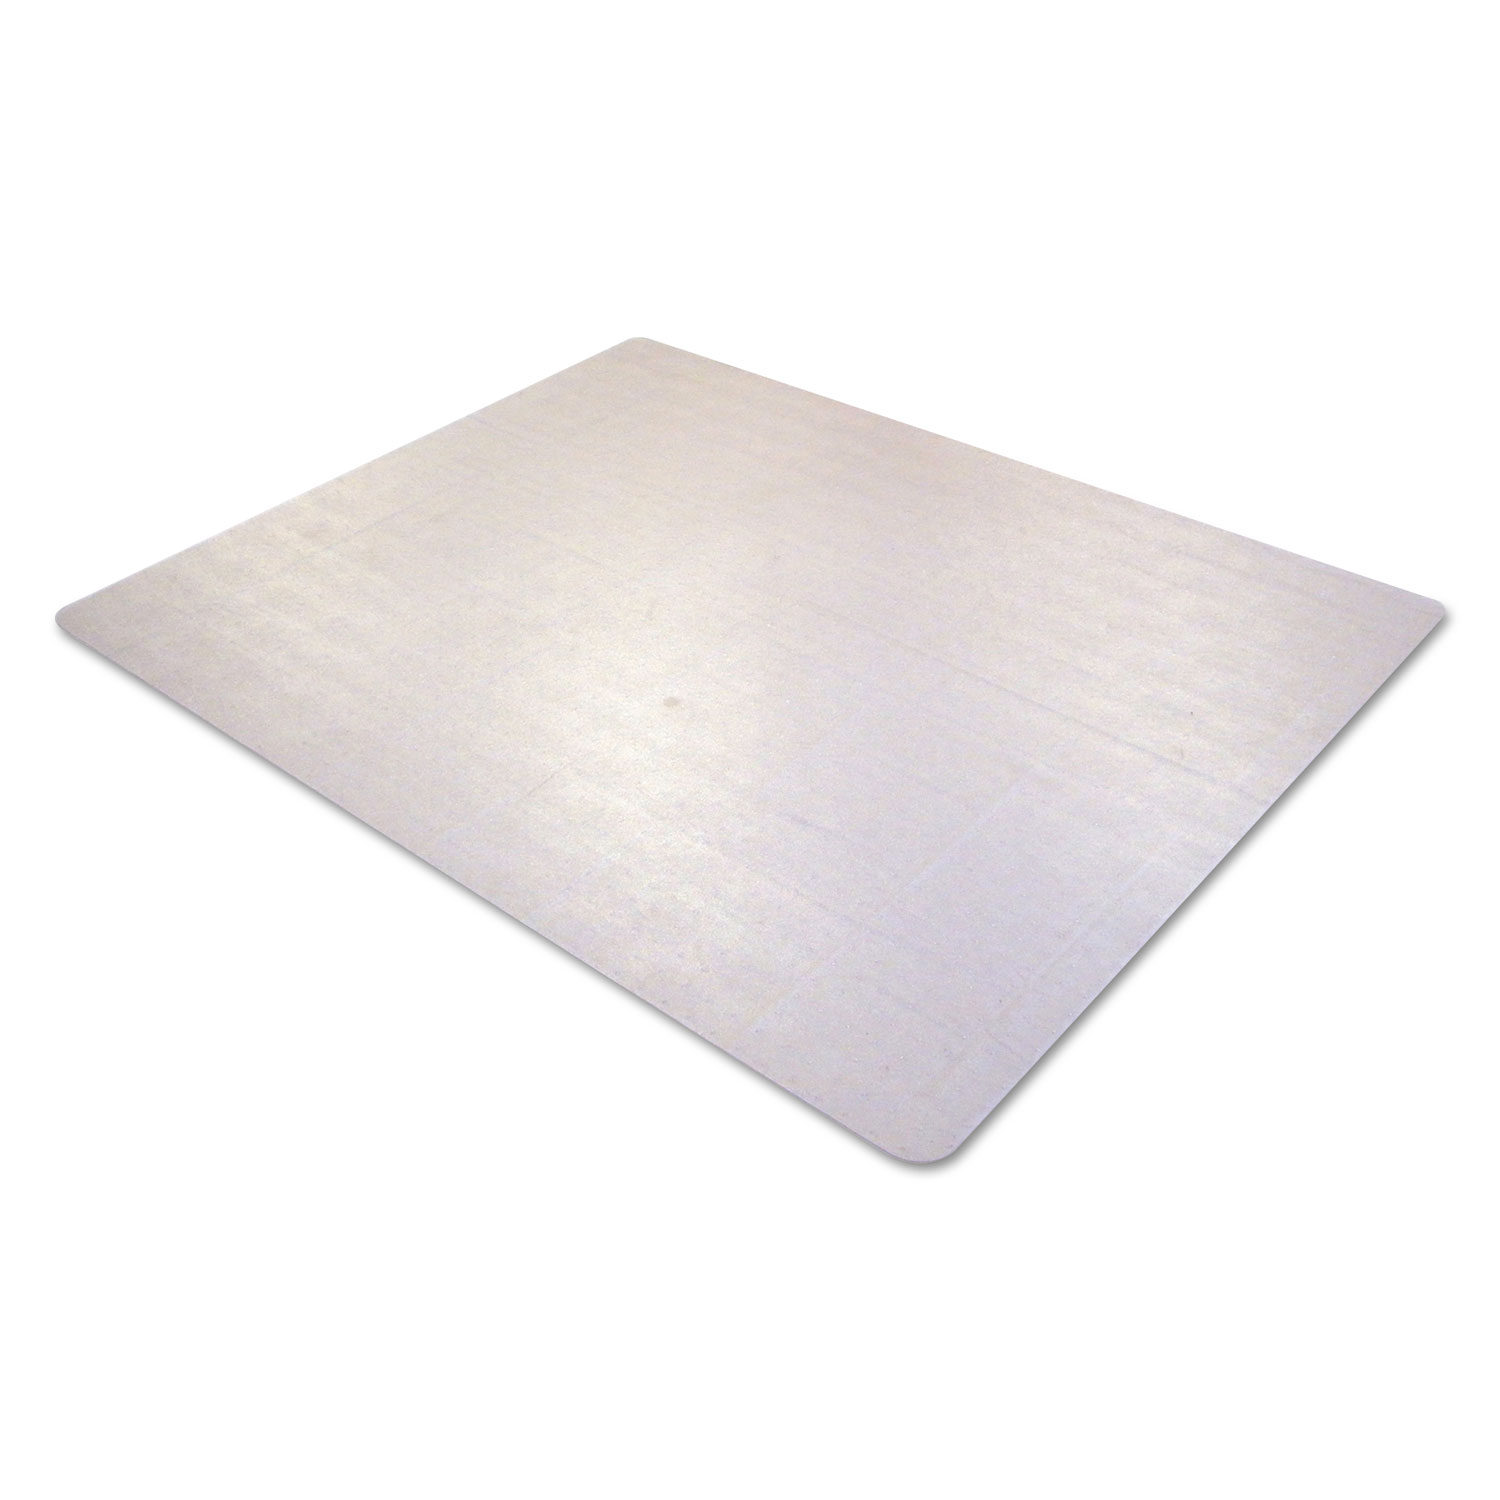 Cleartex Ultimat Polycarbonate Chair Mat for High Pile Carpets, 60 x 48